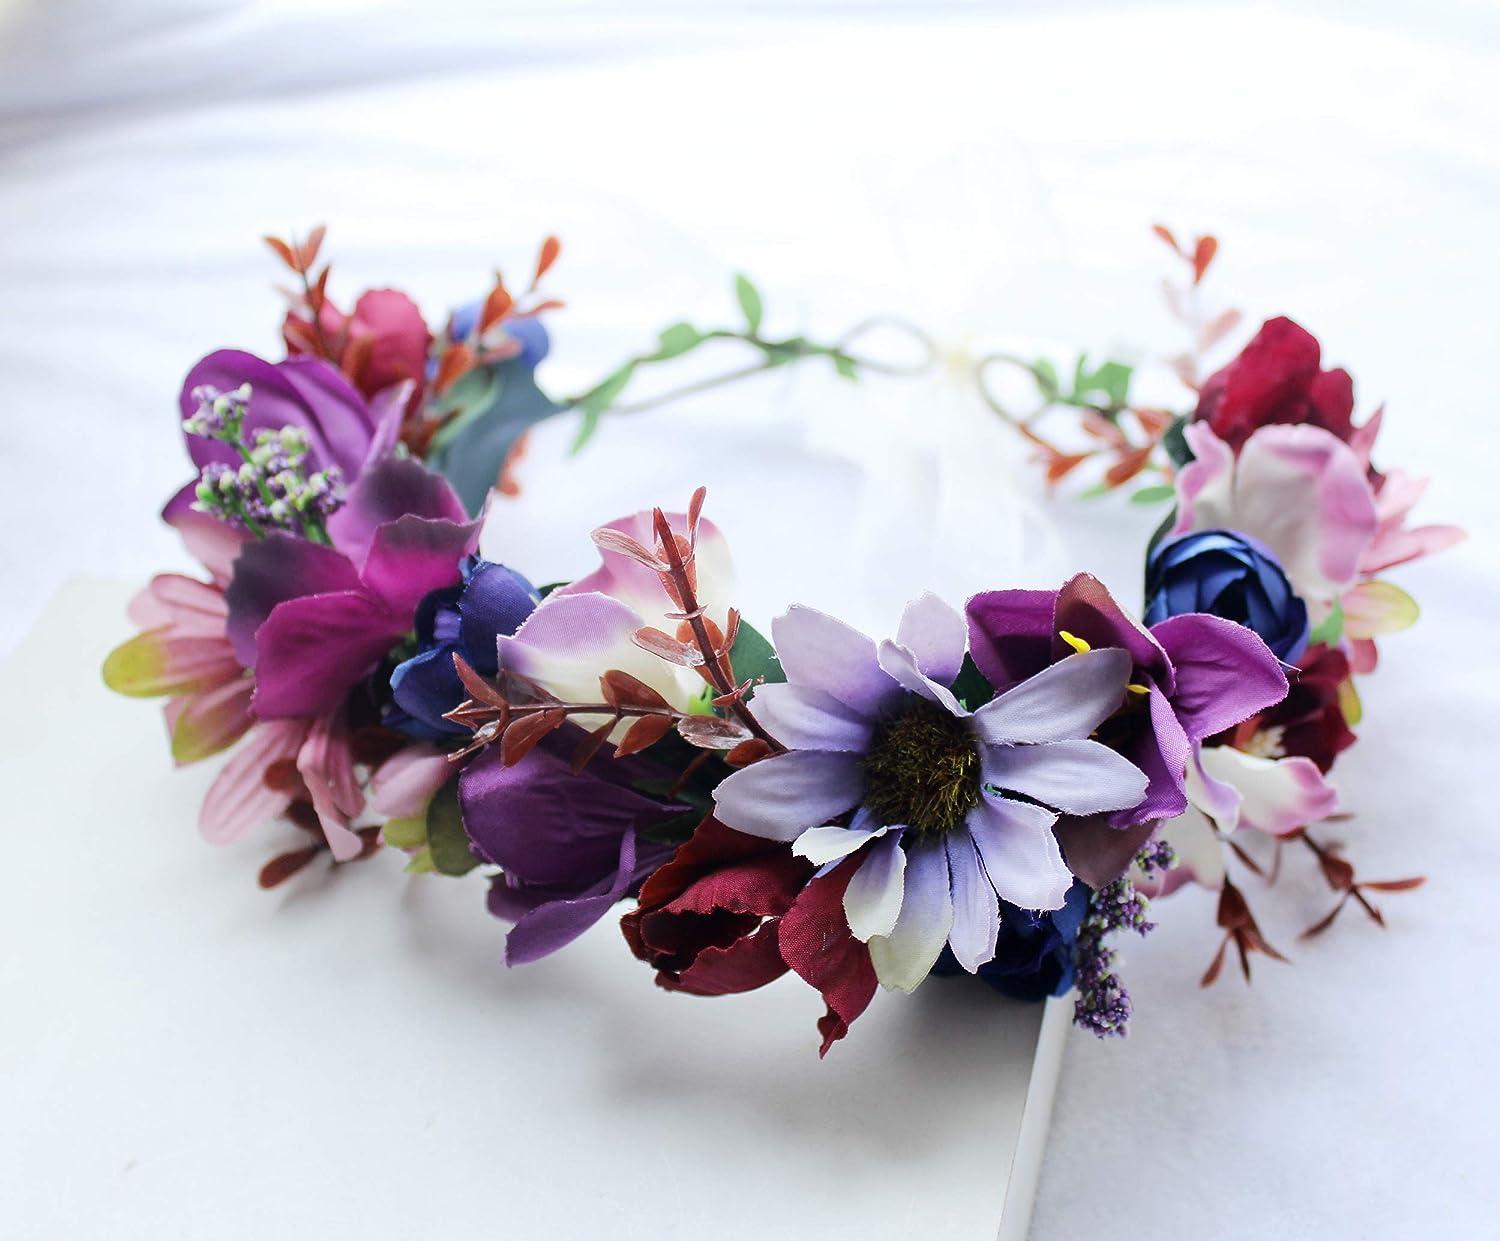 Handmade Flower Crown for Women Maternity PhotoShoot Floral Crown Headband  Hair Wreath Flower Garland Headpiece with Ribbon for Wedding Festival Party